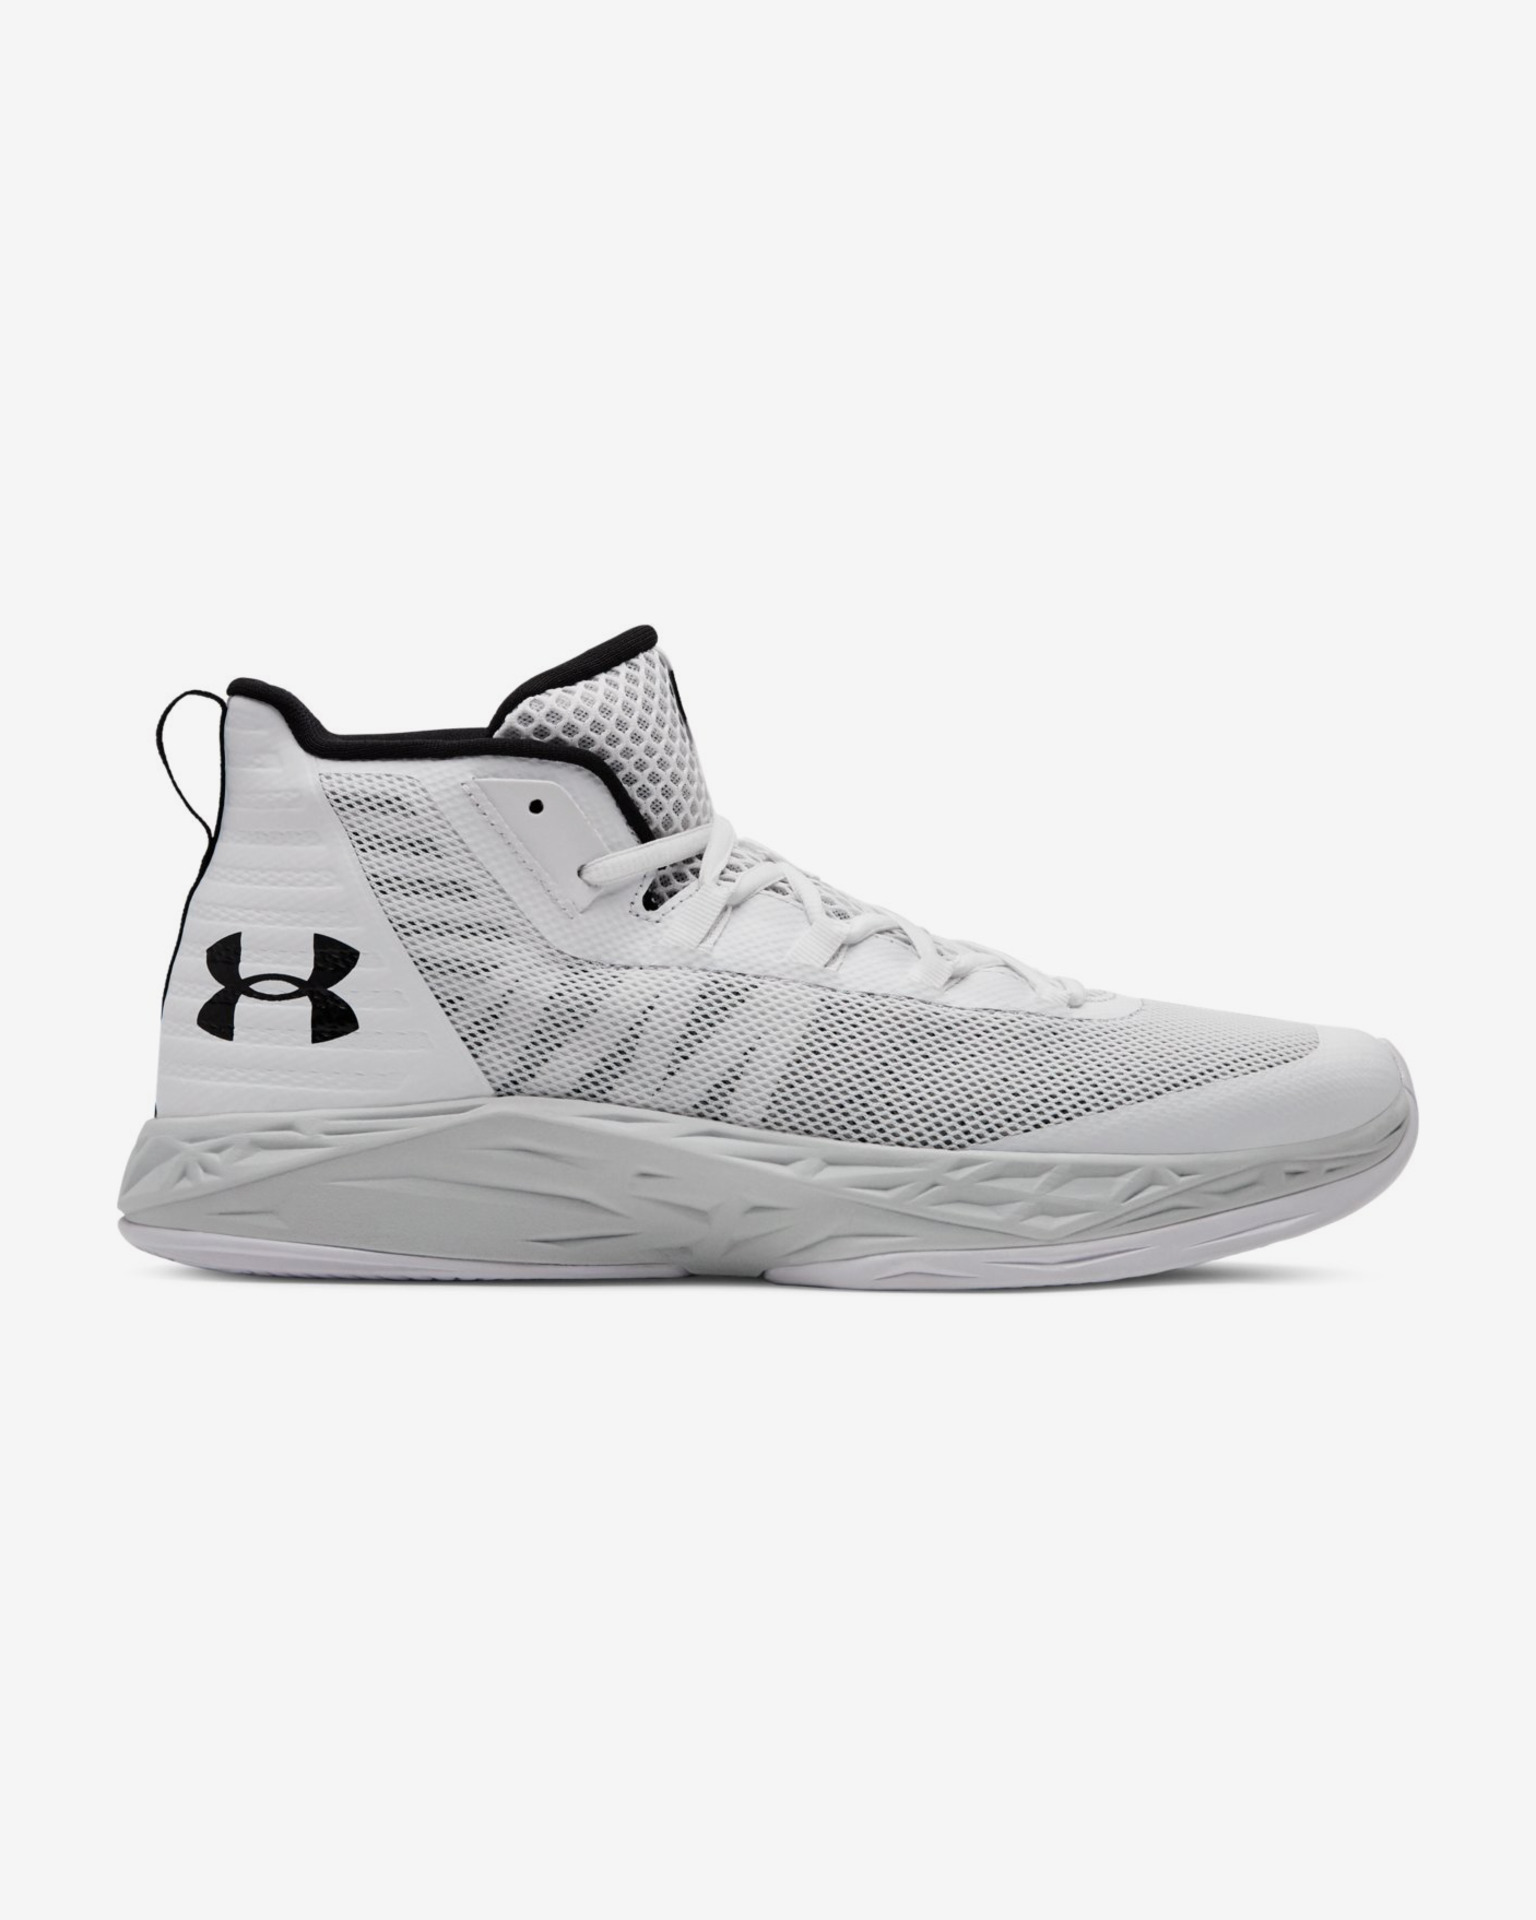 Under Armour - Jet Mid Basketball Sneakers